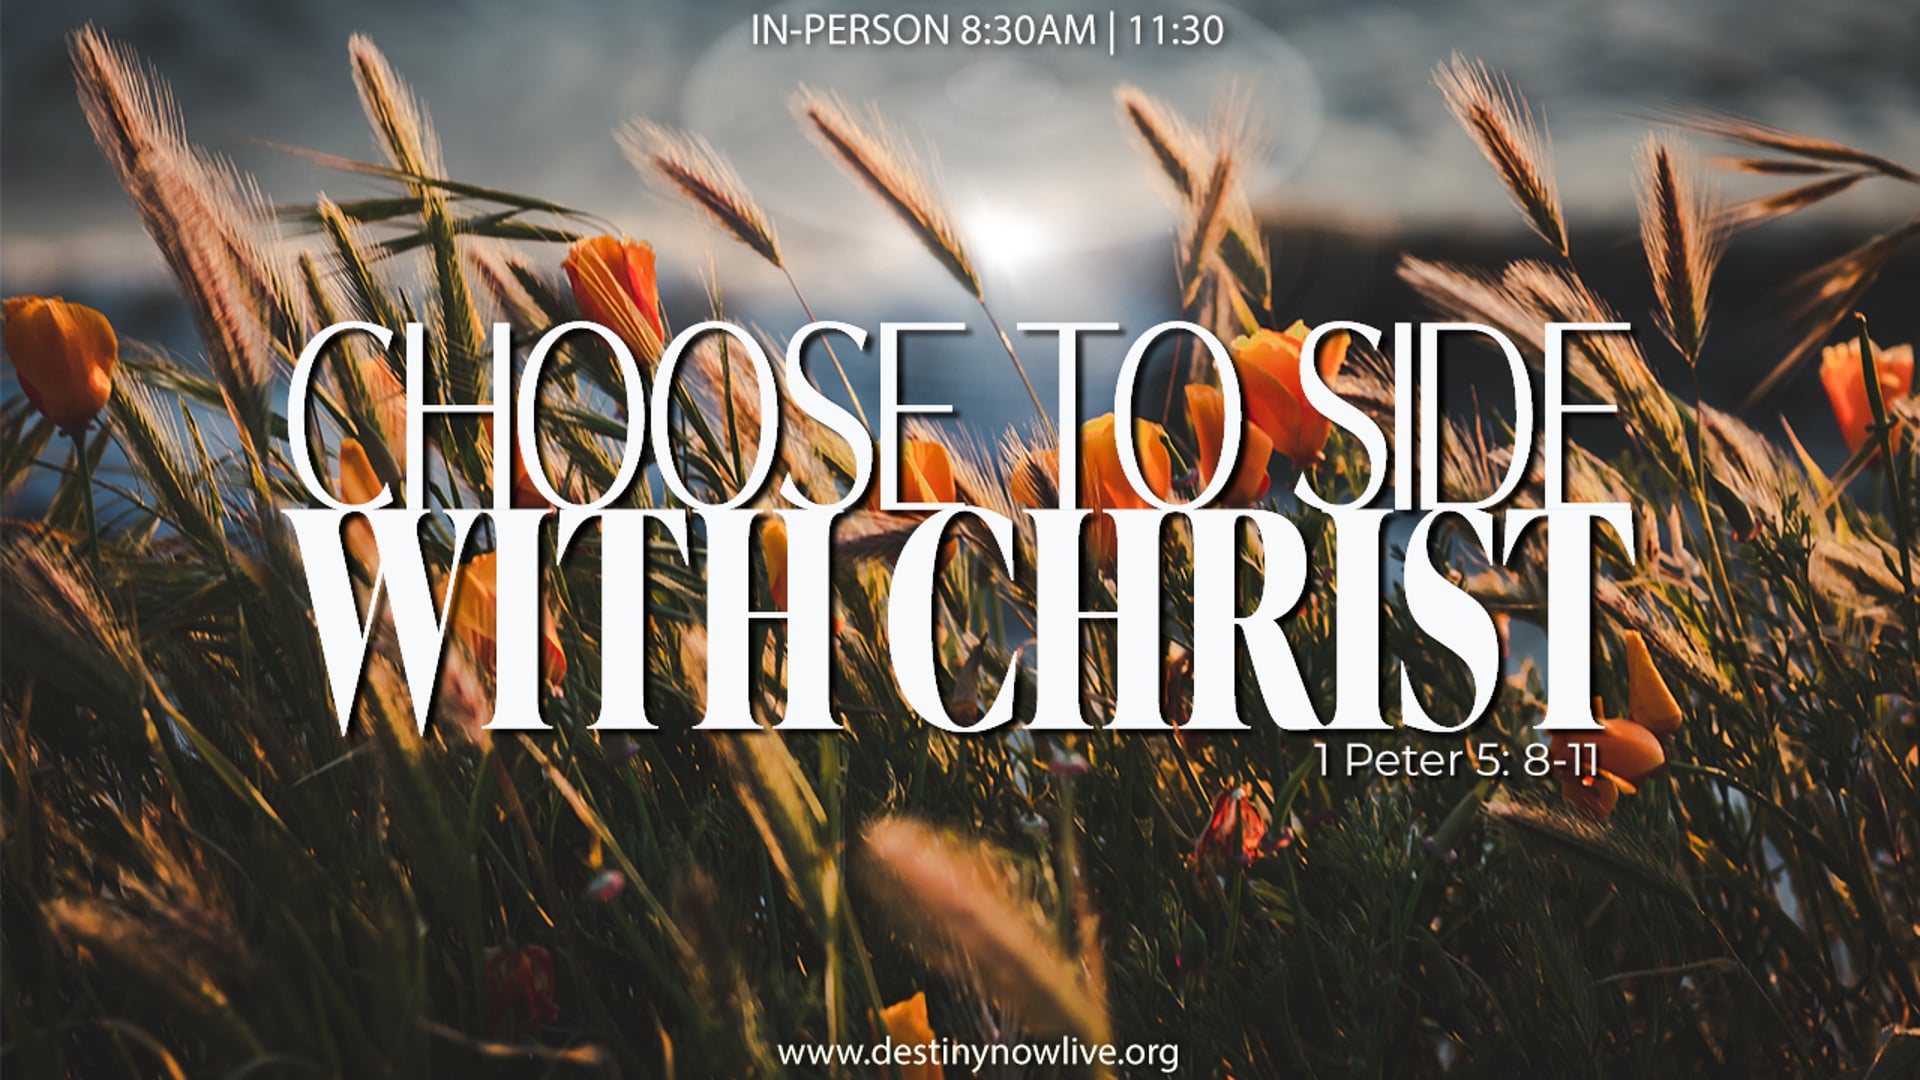 "Choose To Side With Christ!" - Online Giving: Text to Give - 910-460-3377 - Give Online @ www.destinynow.org